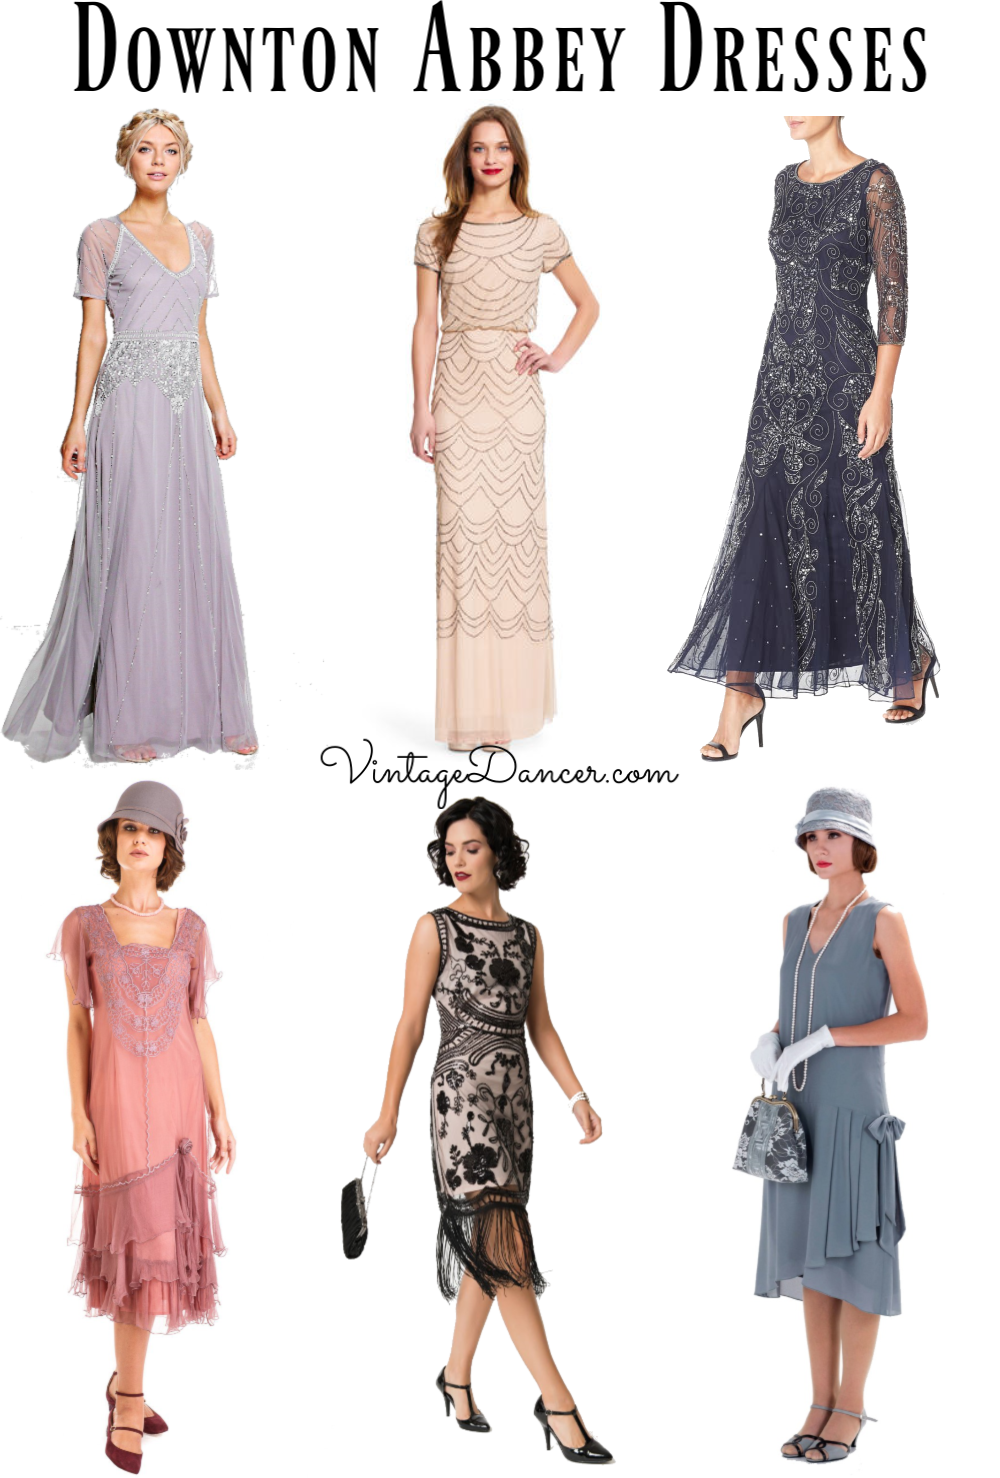 dresses from the 20s